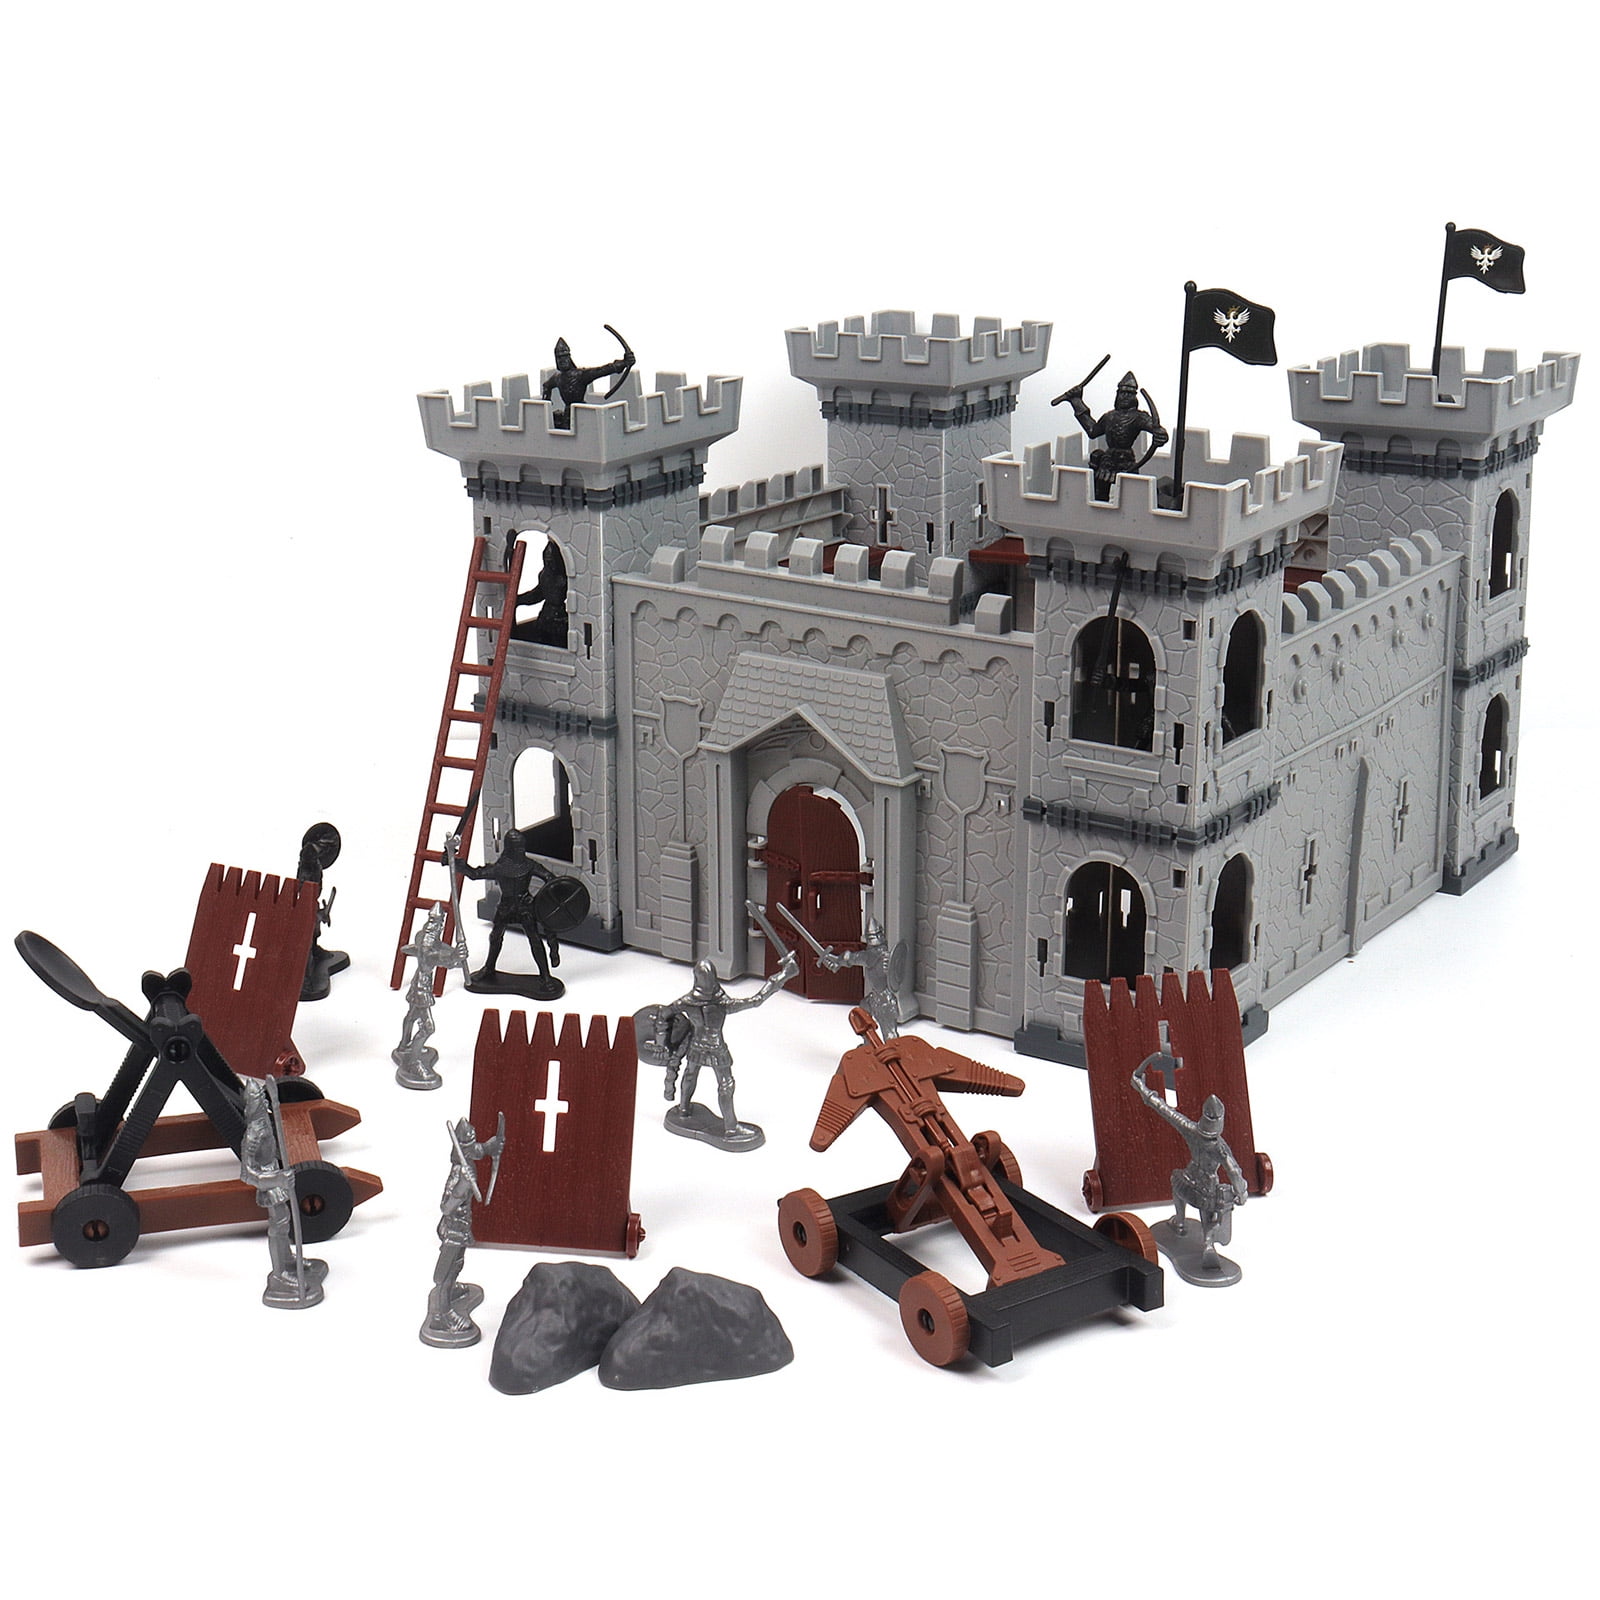 The White Knight's Miniature Castle - General Frothings